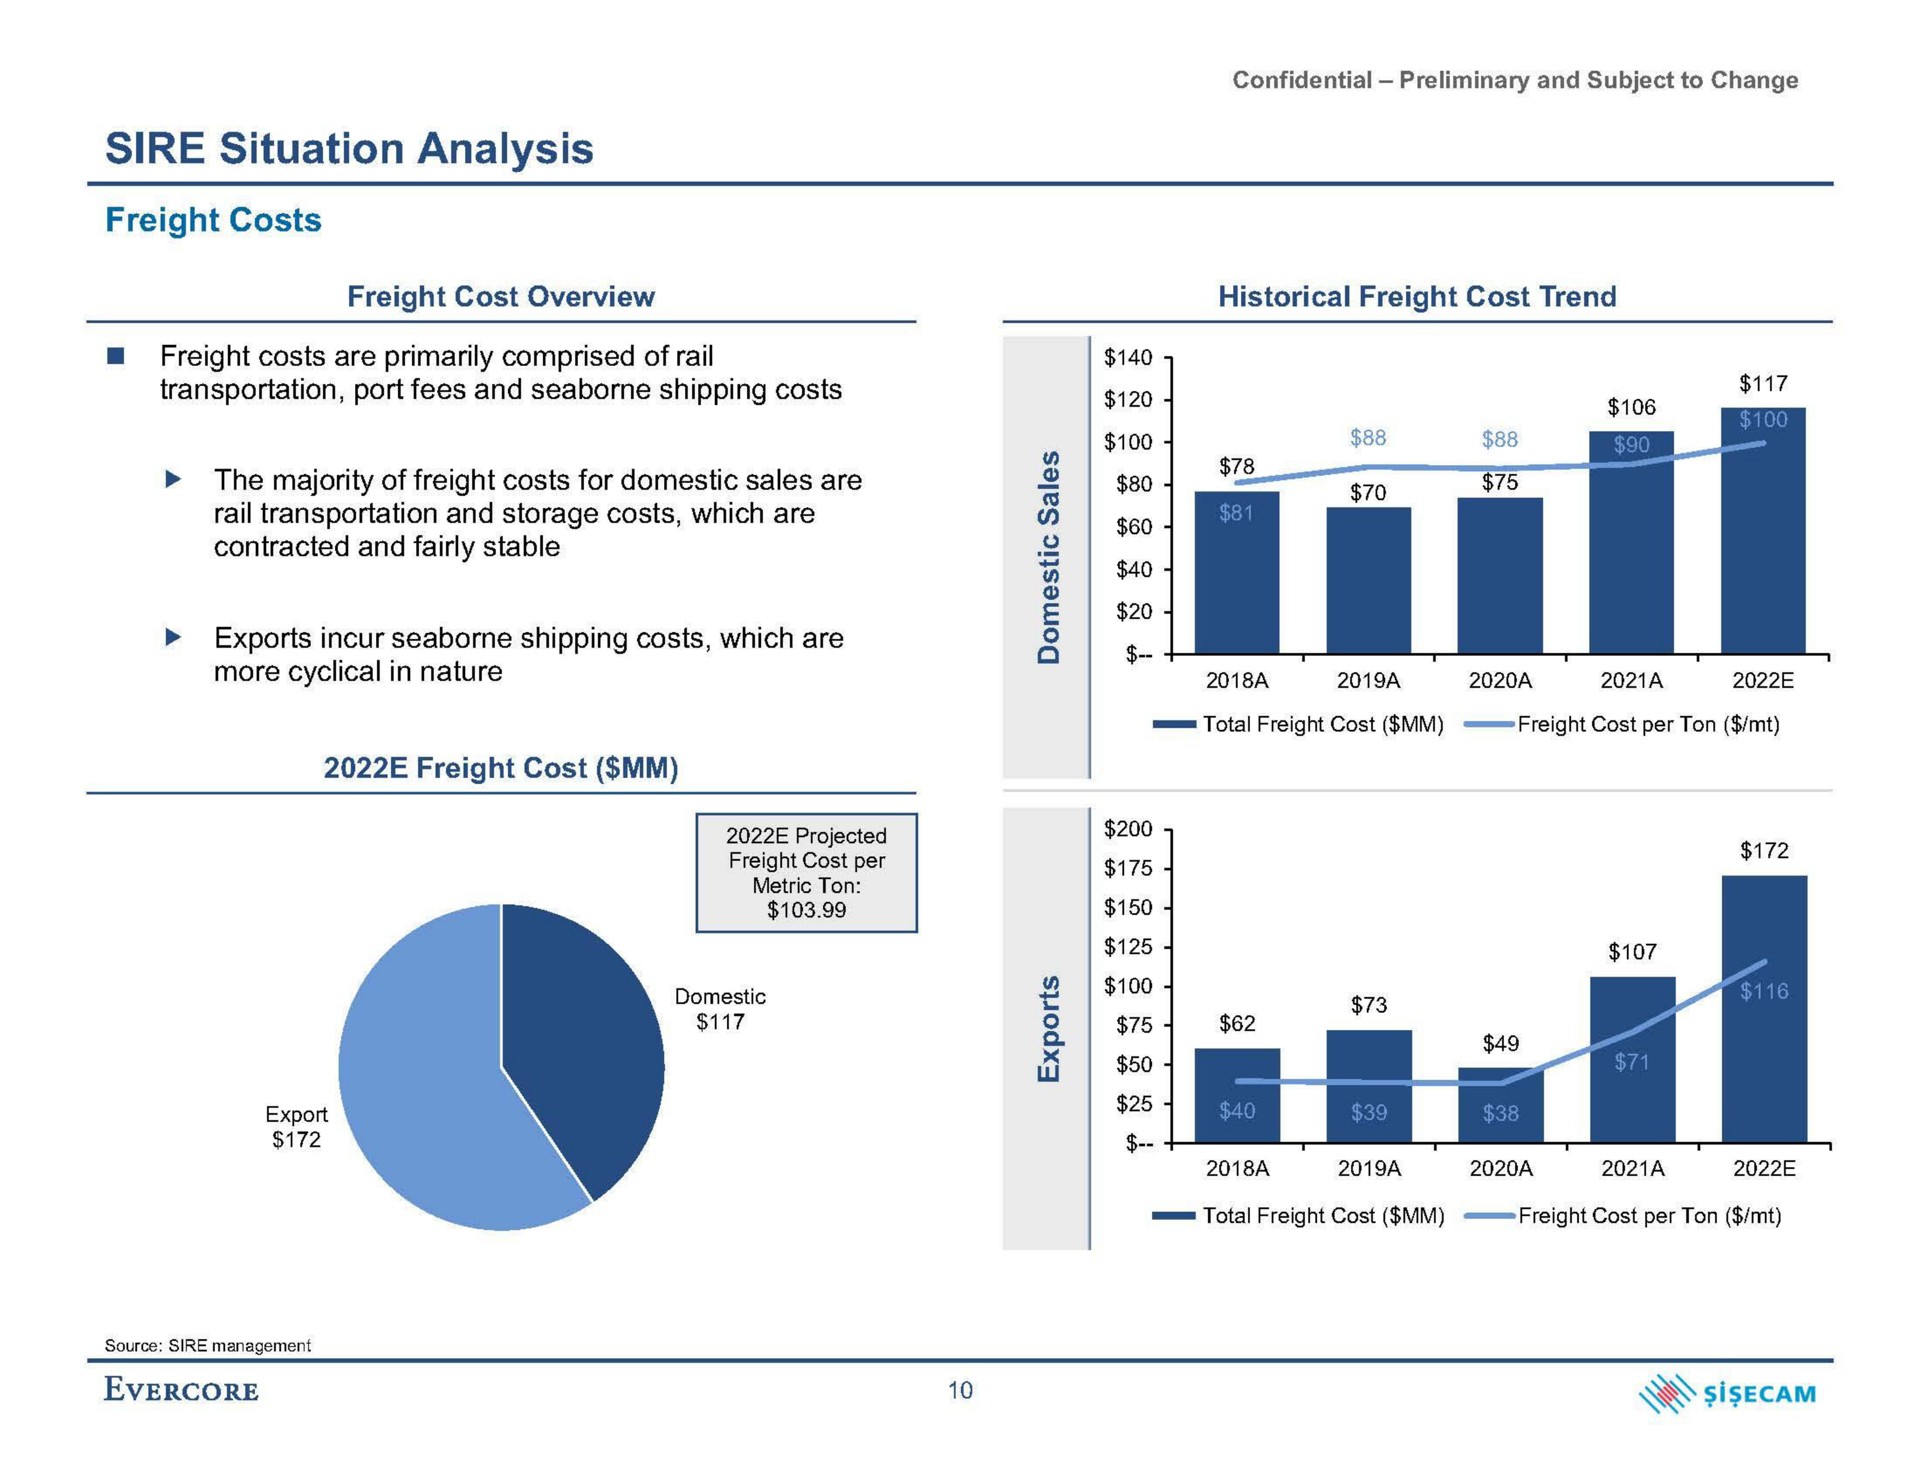 sire situation analysis freight costs freight cost | Evercore